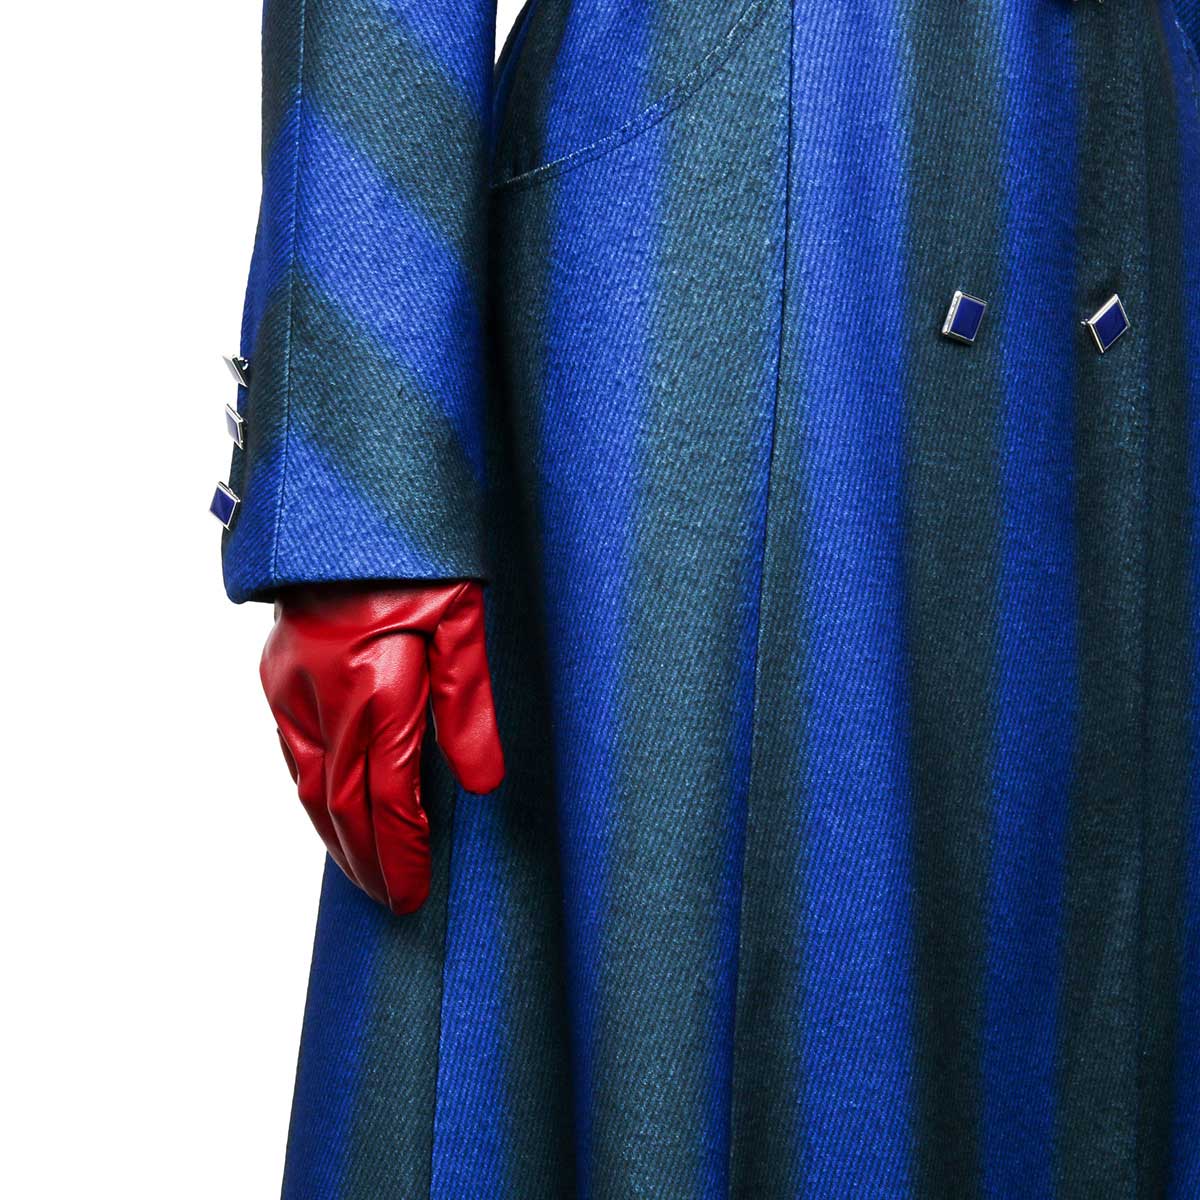 2018 Mary Poppins blue outfit Dress Cosplay Costume Mary Poppins Returns Halloween Costume